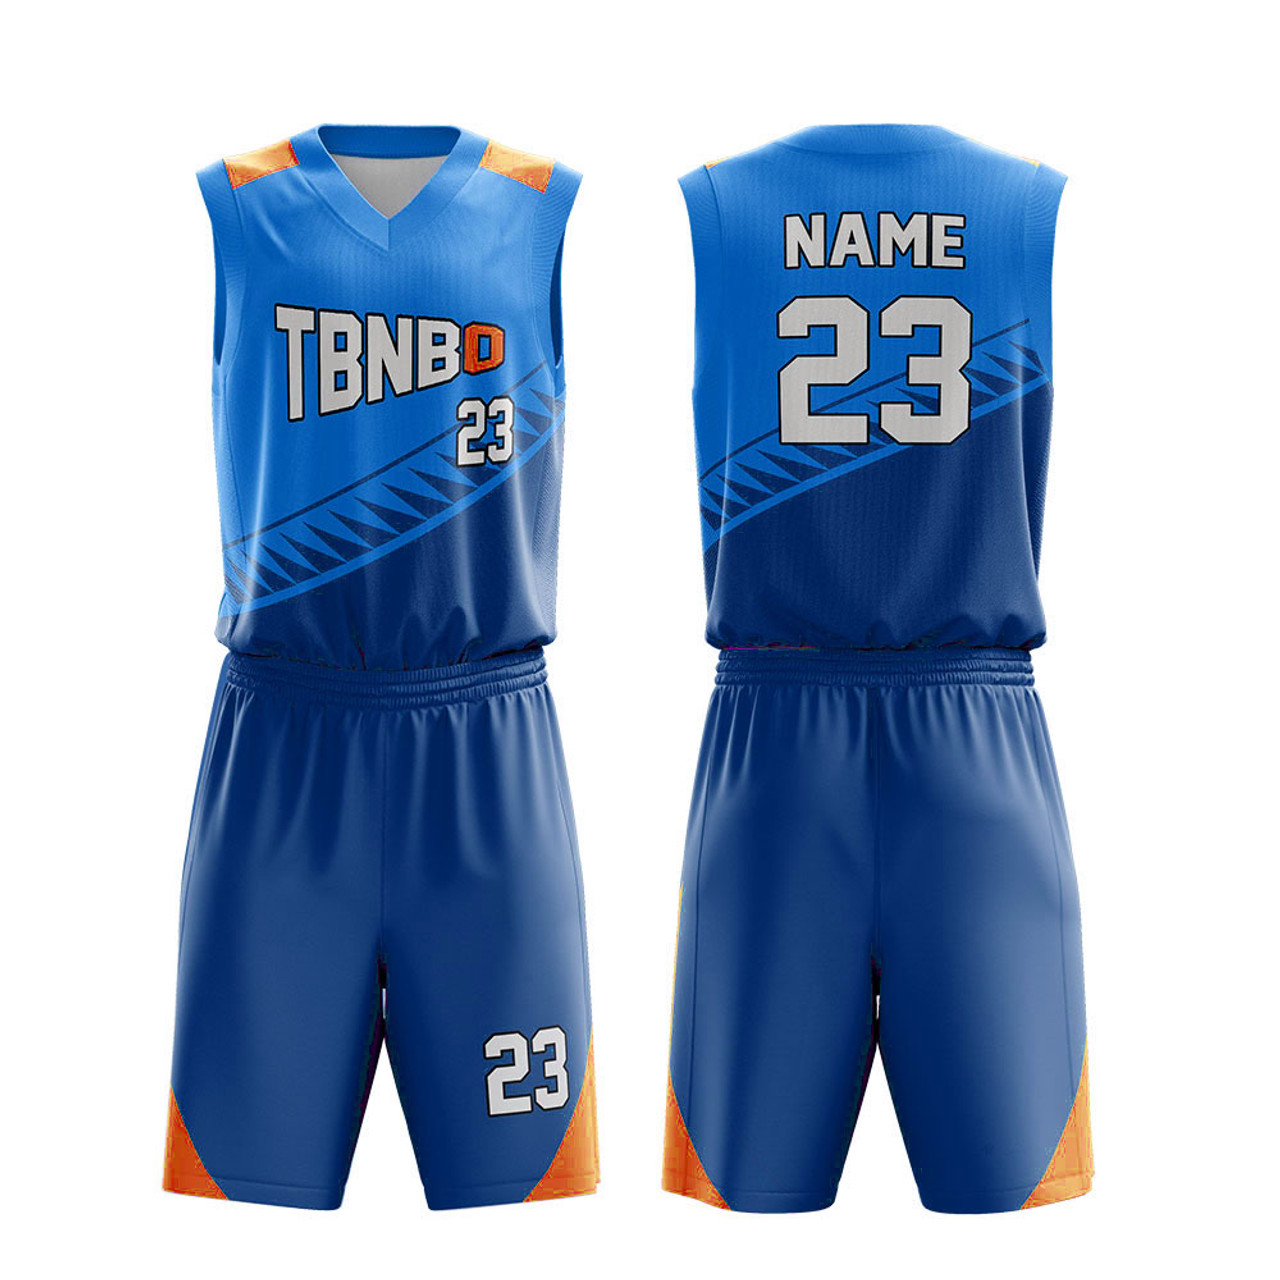 Custom Basketball Jersey Design Blue And Red Personalized Color